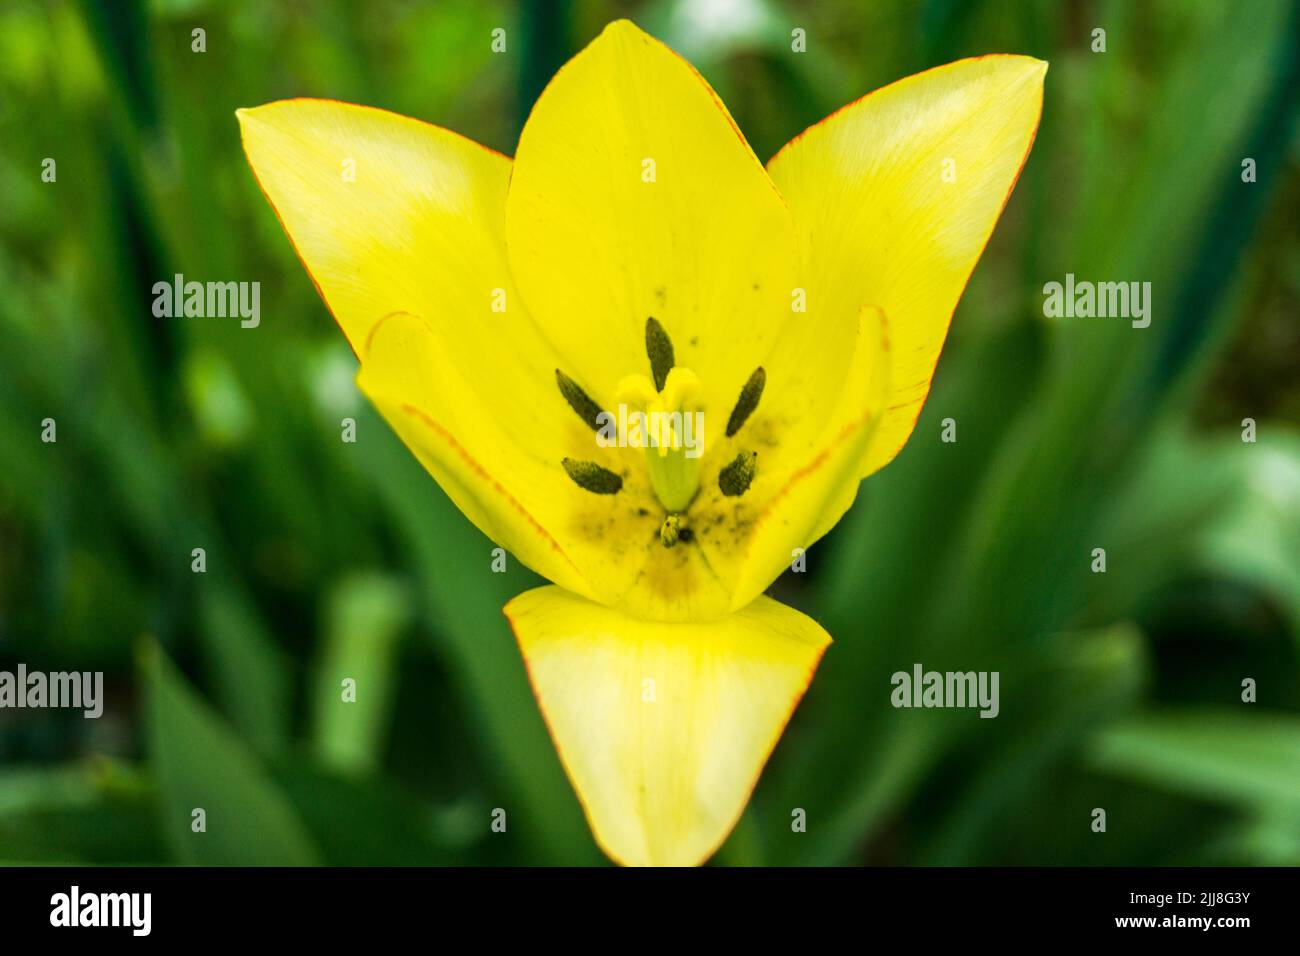 Yellow lily flower on a background of green leaves. Selective focus Stock Photo